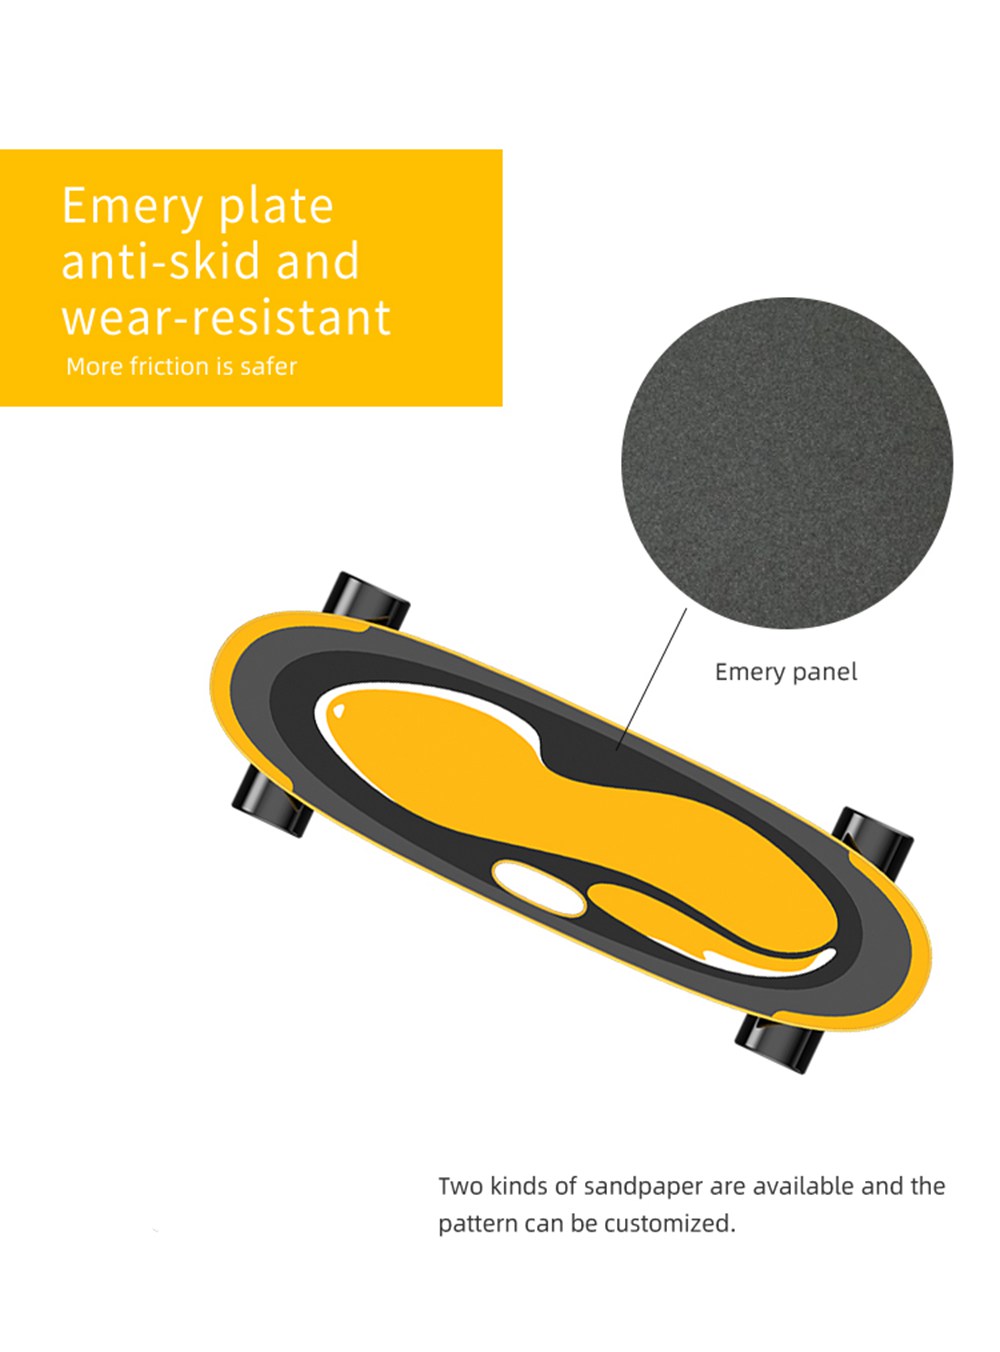 Eswing M15-1 Electric Skateboard Body Control 4 Wheels LG 77.83WH Battery Max Speed 15km/h - Yellow